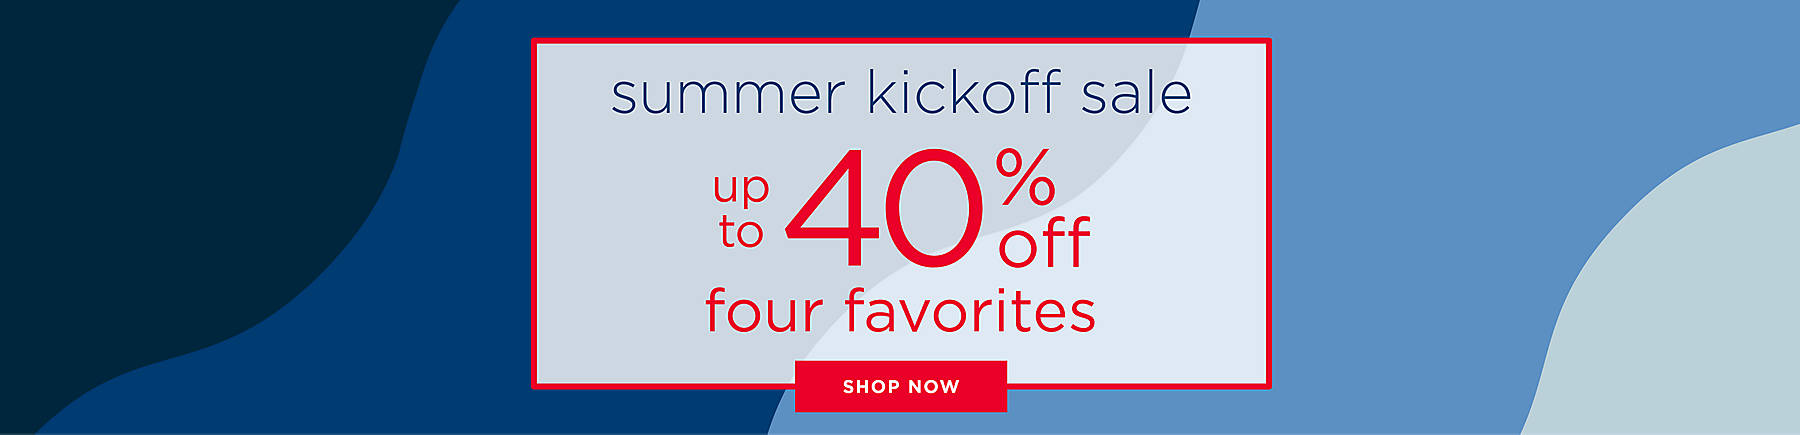 Summer Kickoff Sale Up to 40% Off